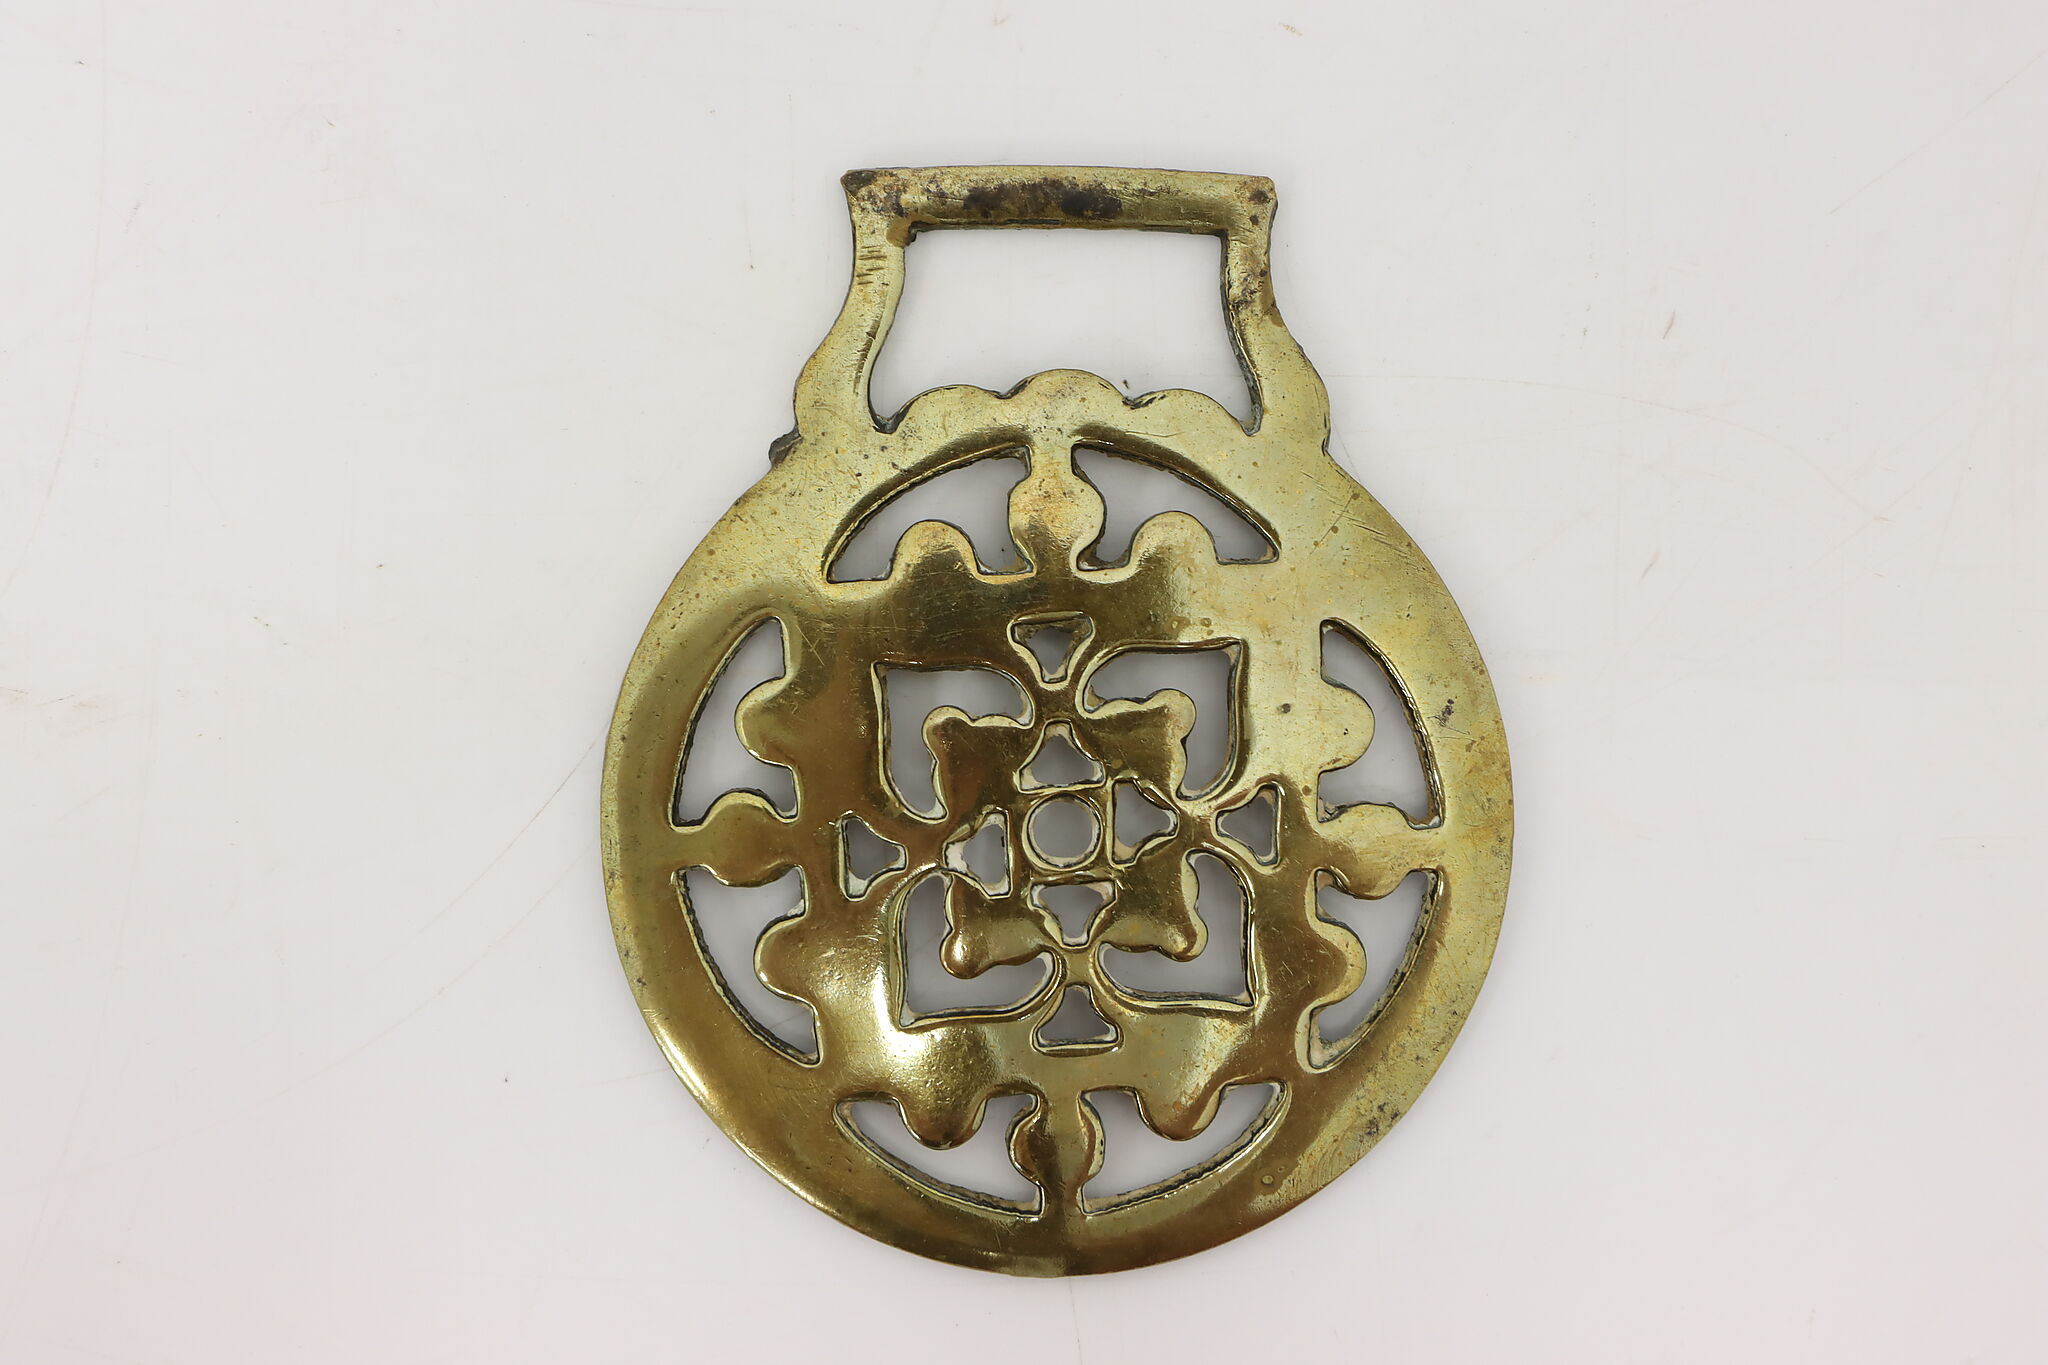 How to Identify Antique Brass